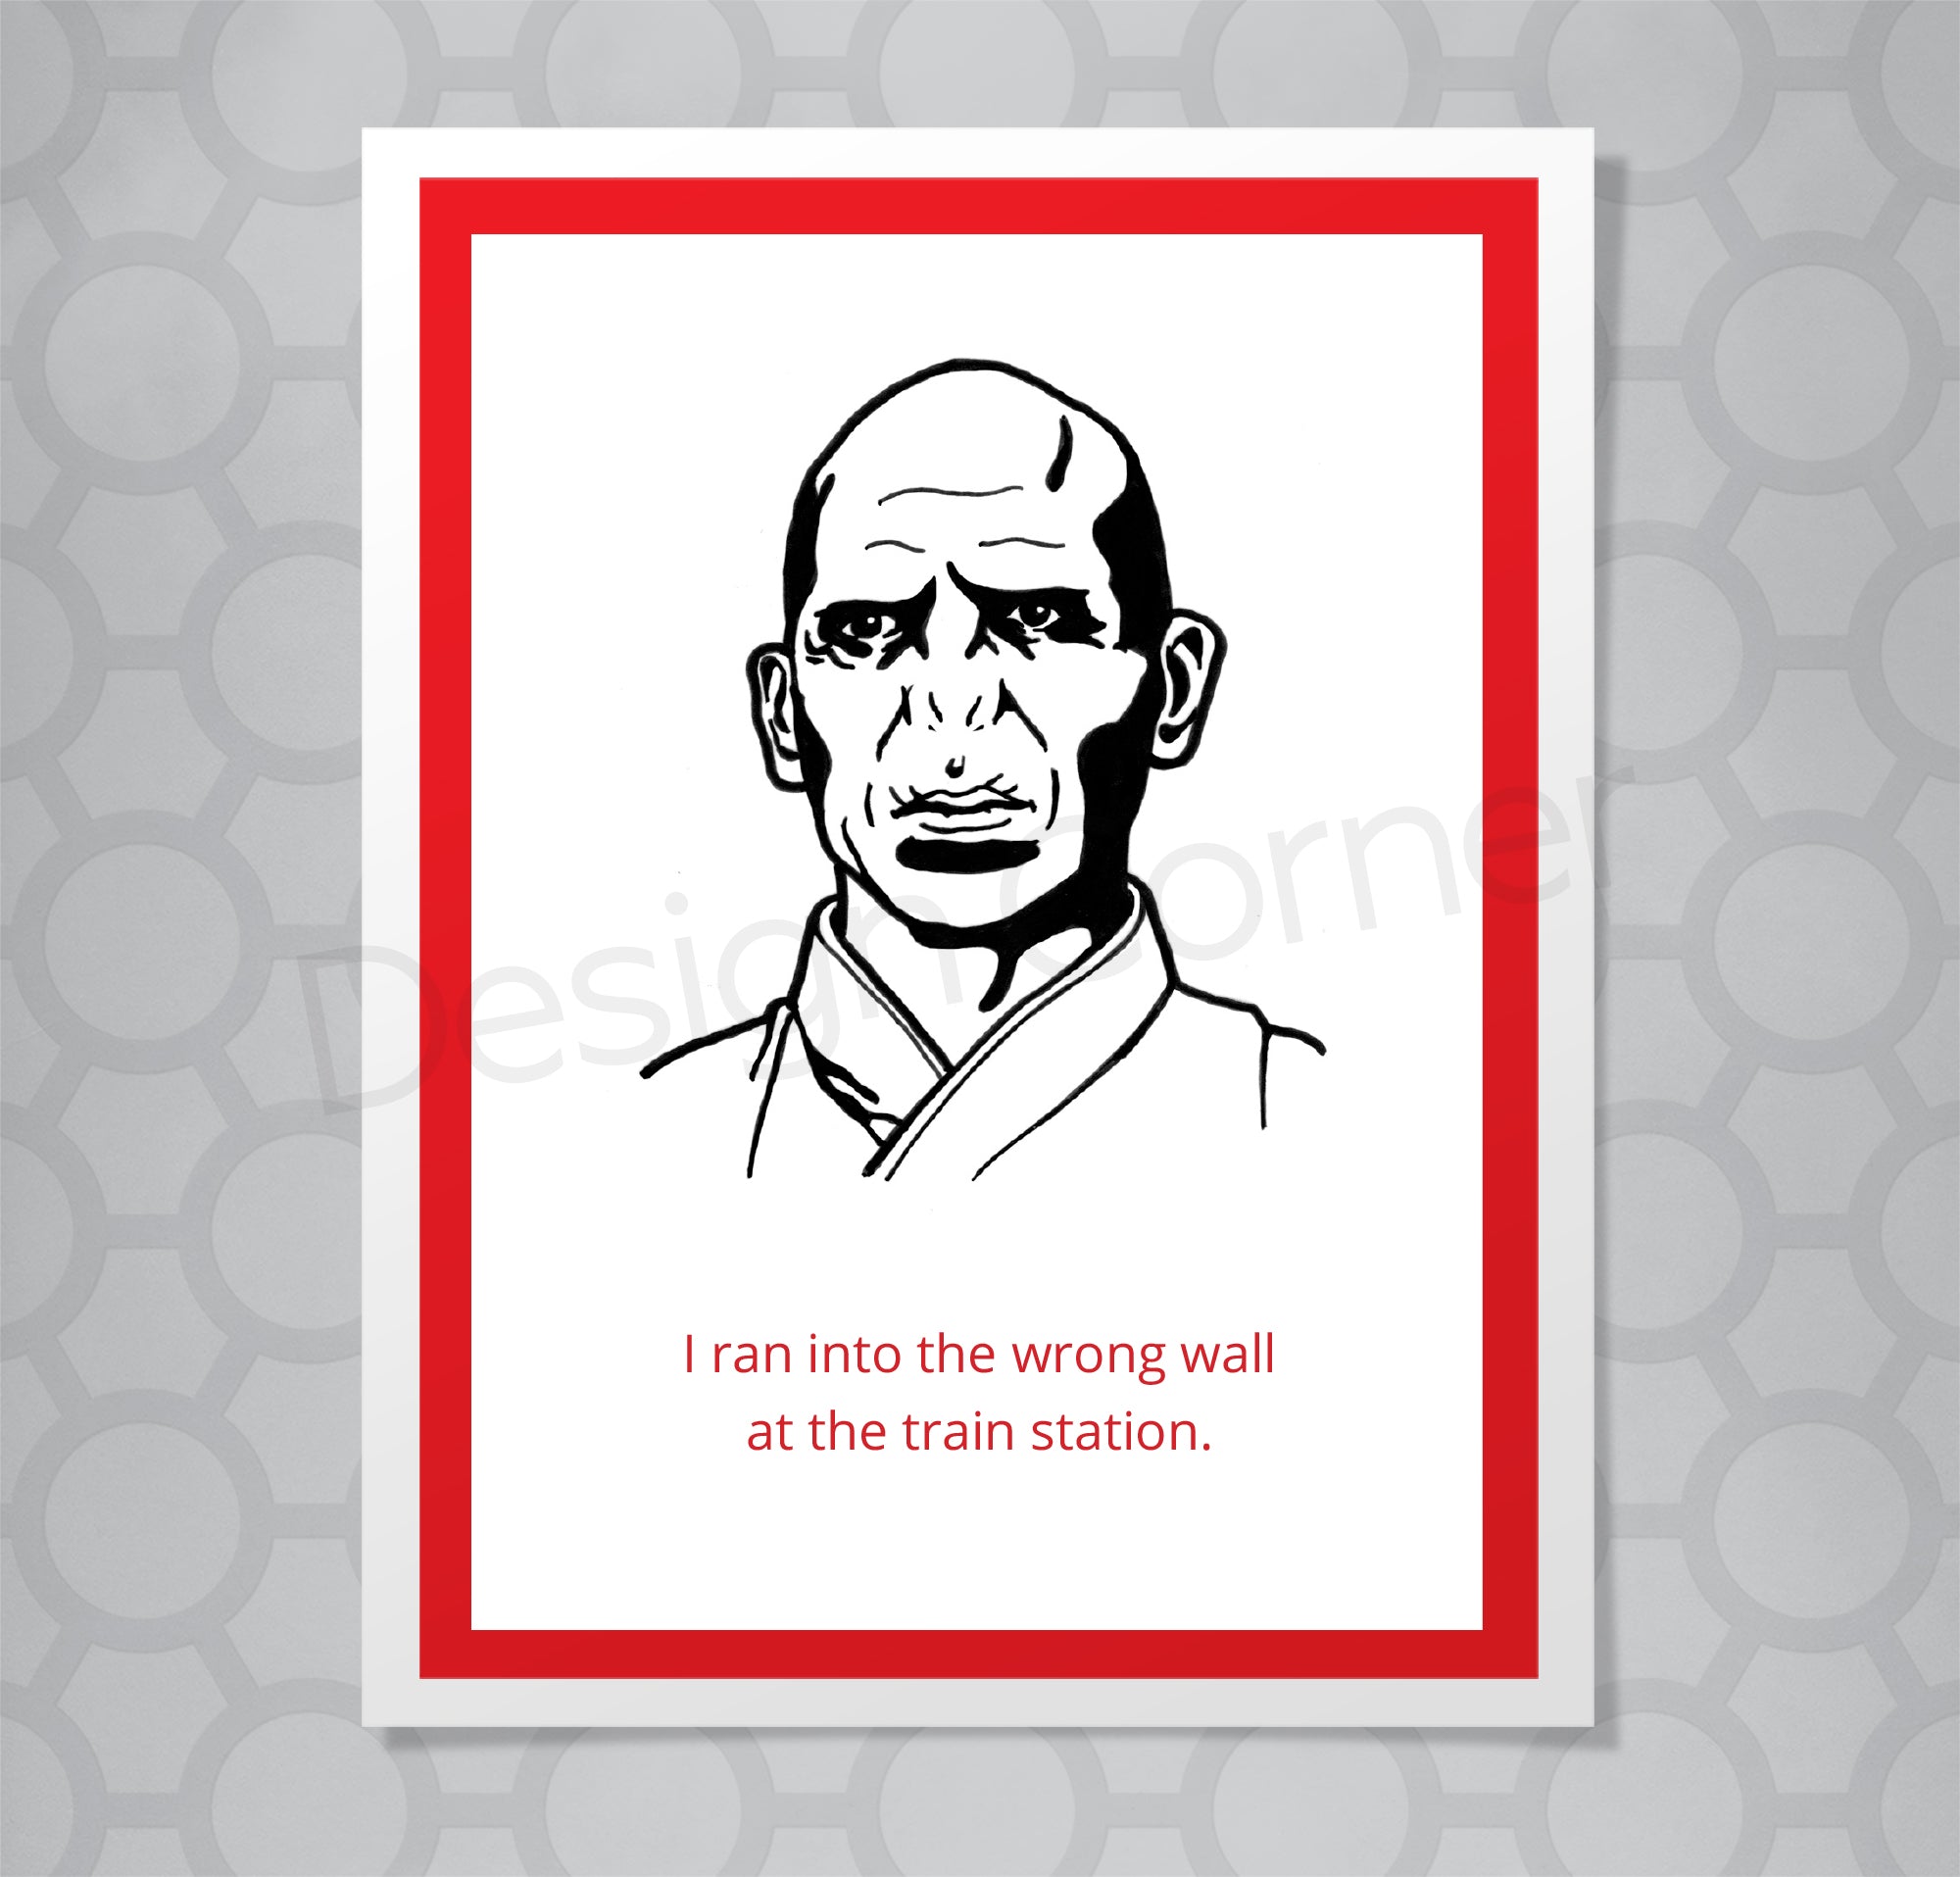 Greeting card with Harry Potter's Lord Voldemort illustration. Caption says I ran into the wrong wall at the train station.